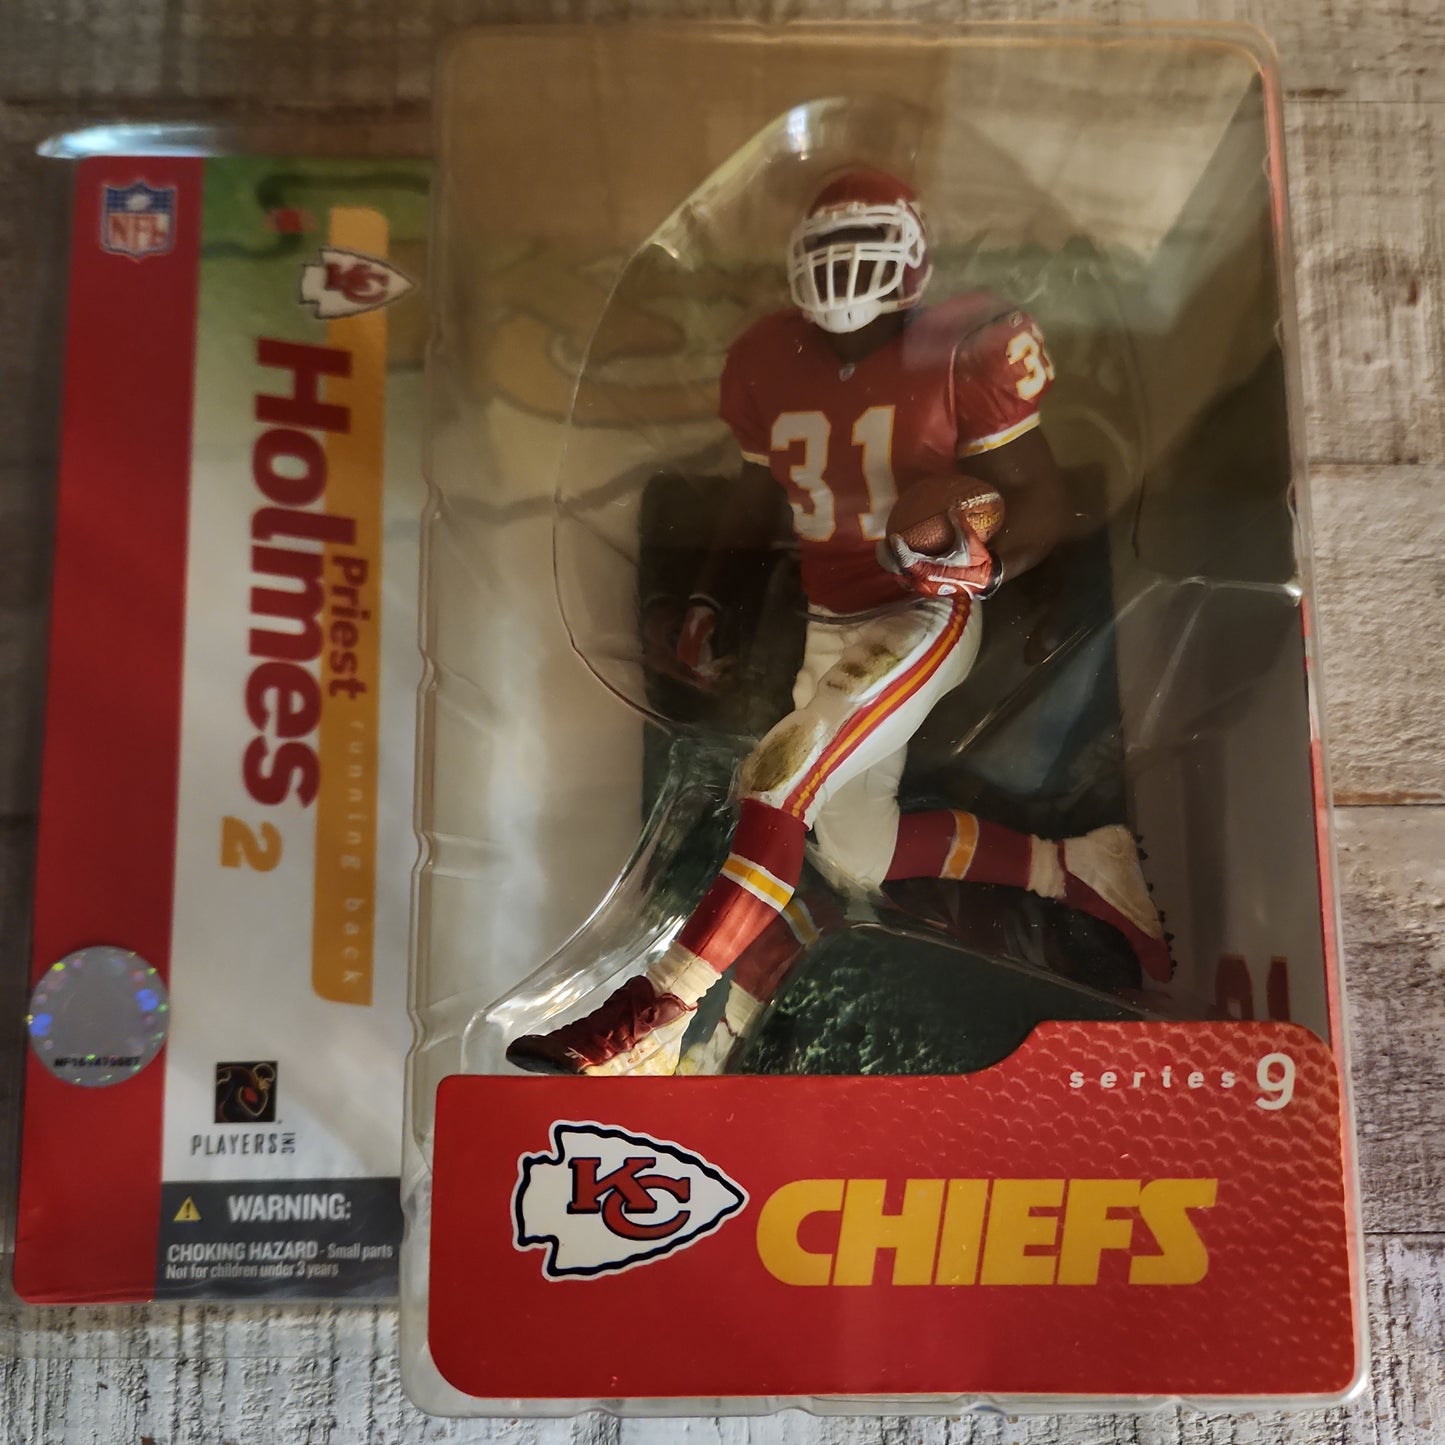 McFarlane Series 9 NFL Priest Holmes Chiefs Red Jersey Action Figure